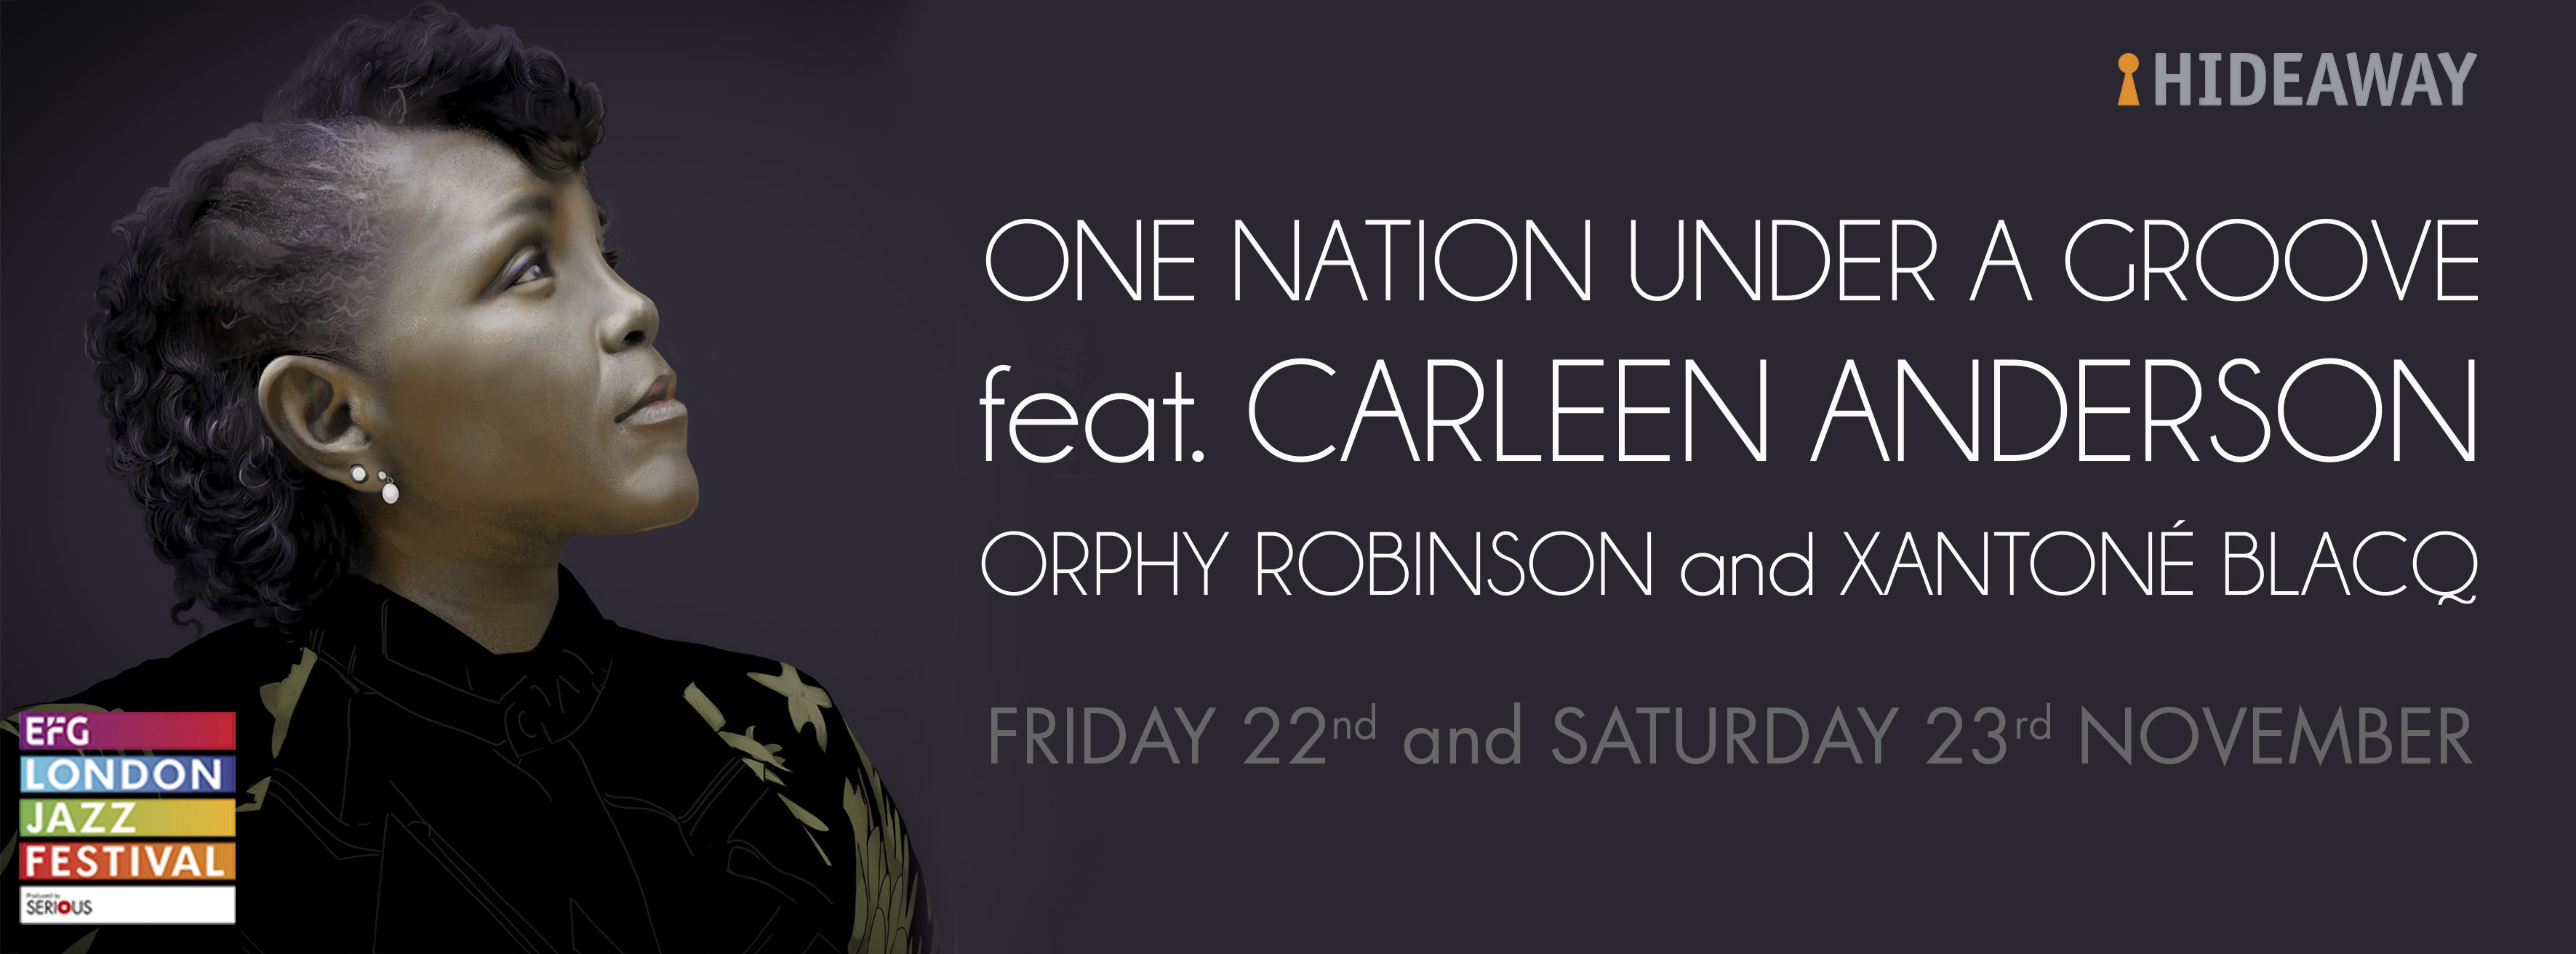 One Nation Under A Groove with Carleen Anderson, Xantone Blacq and Orphy Robinson Friday 22nd November and Saturday 23rd November at Hideaway Jazz Club London